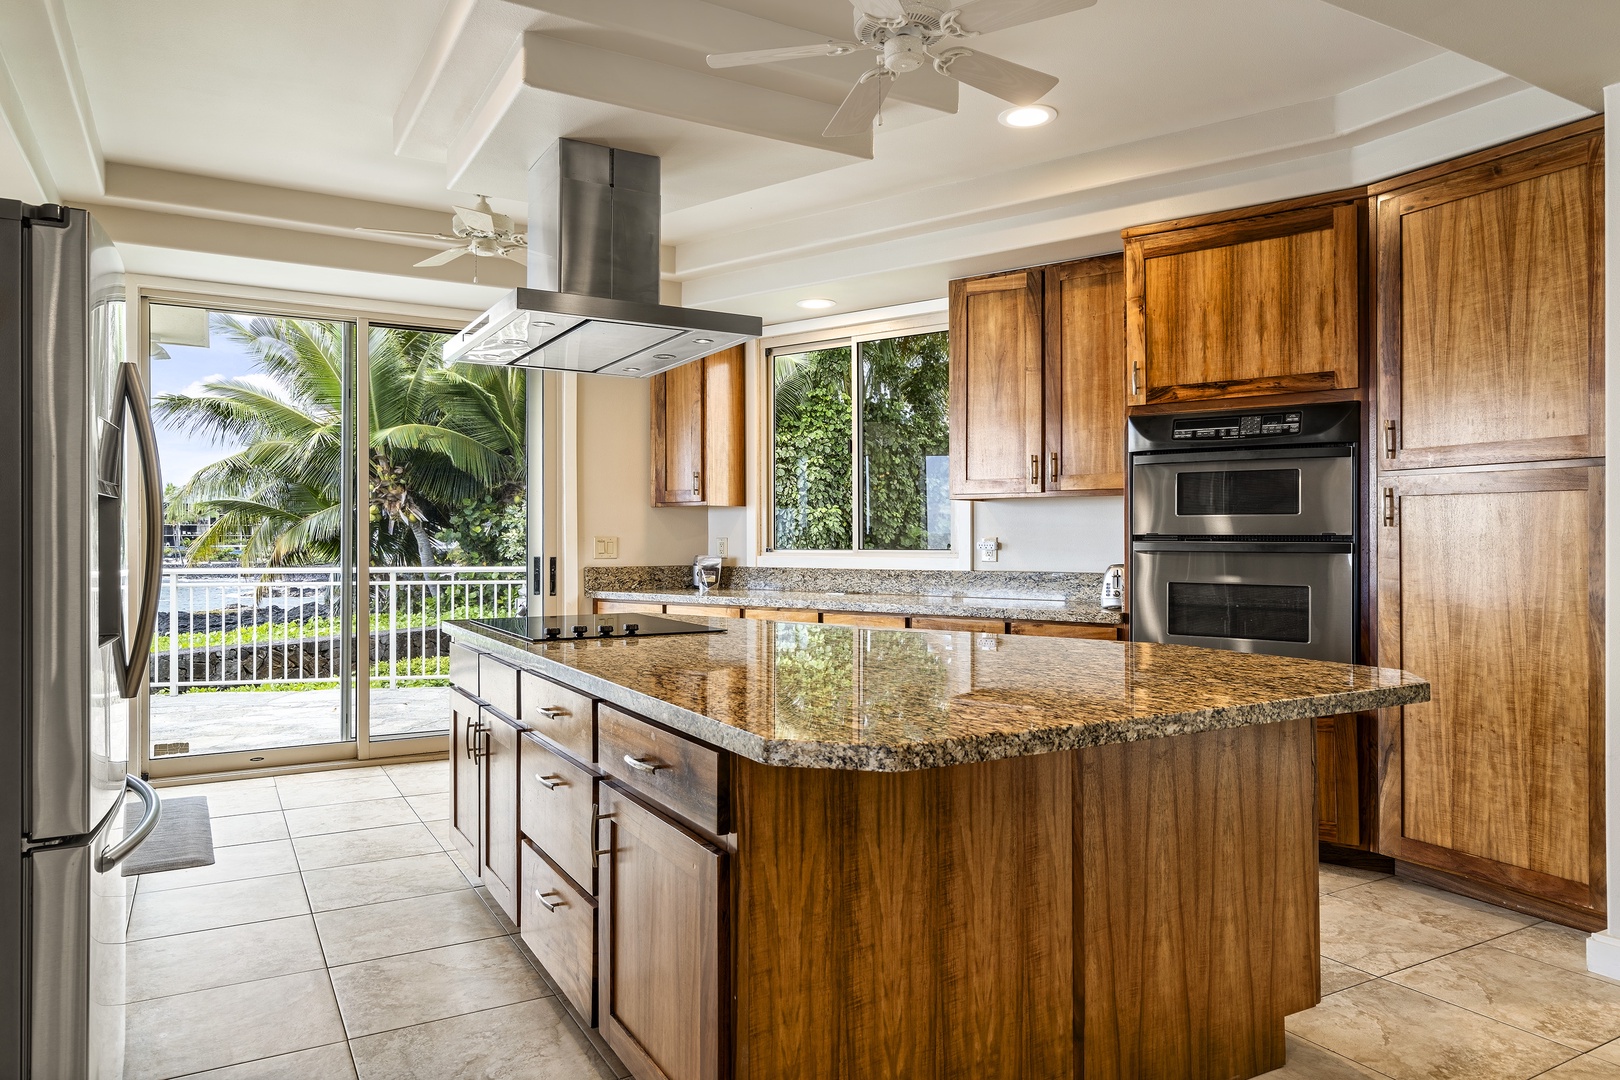 Kailua Kona Vacation Rentals, Ali'i Point #12 - Upgraded kitchen with high end touches!